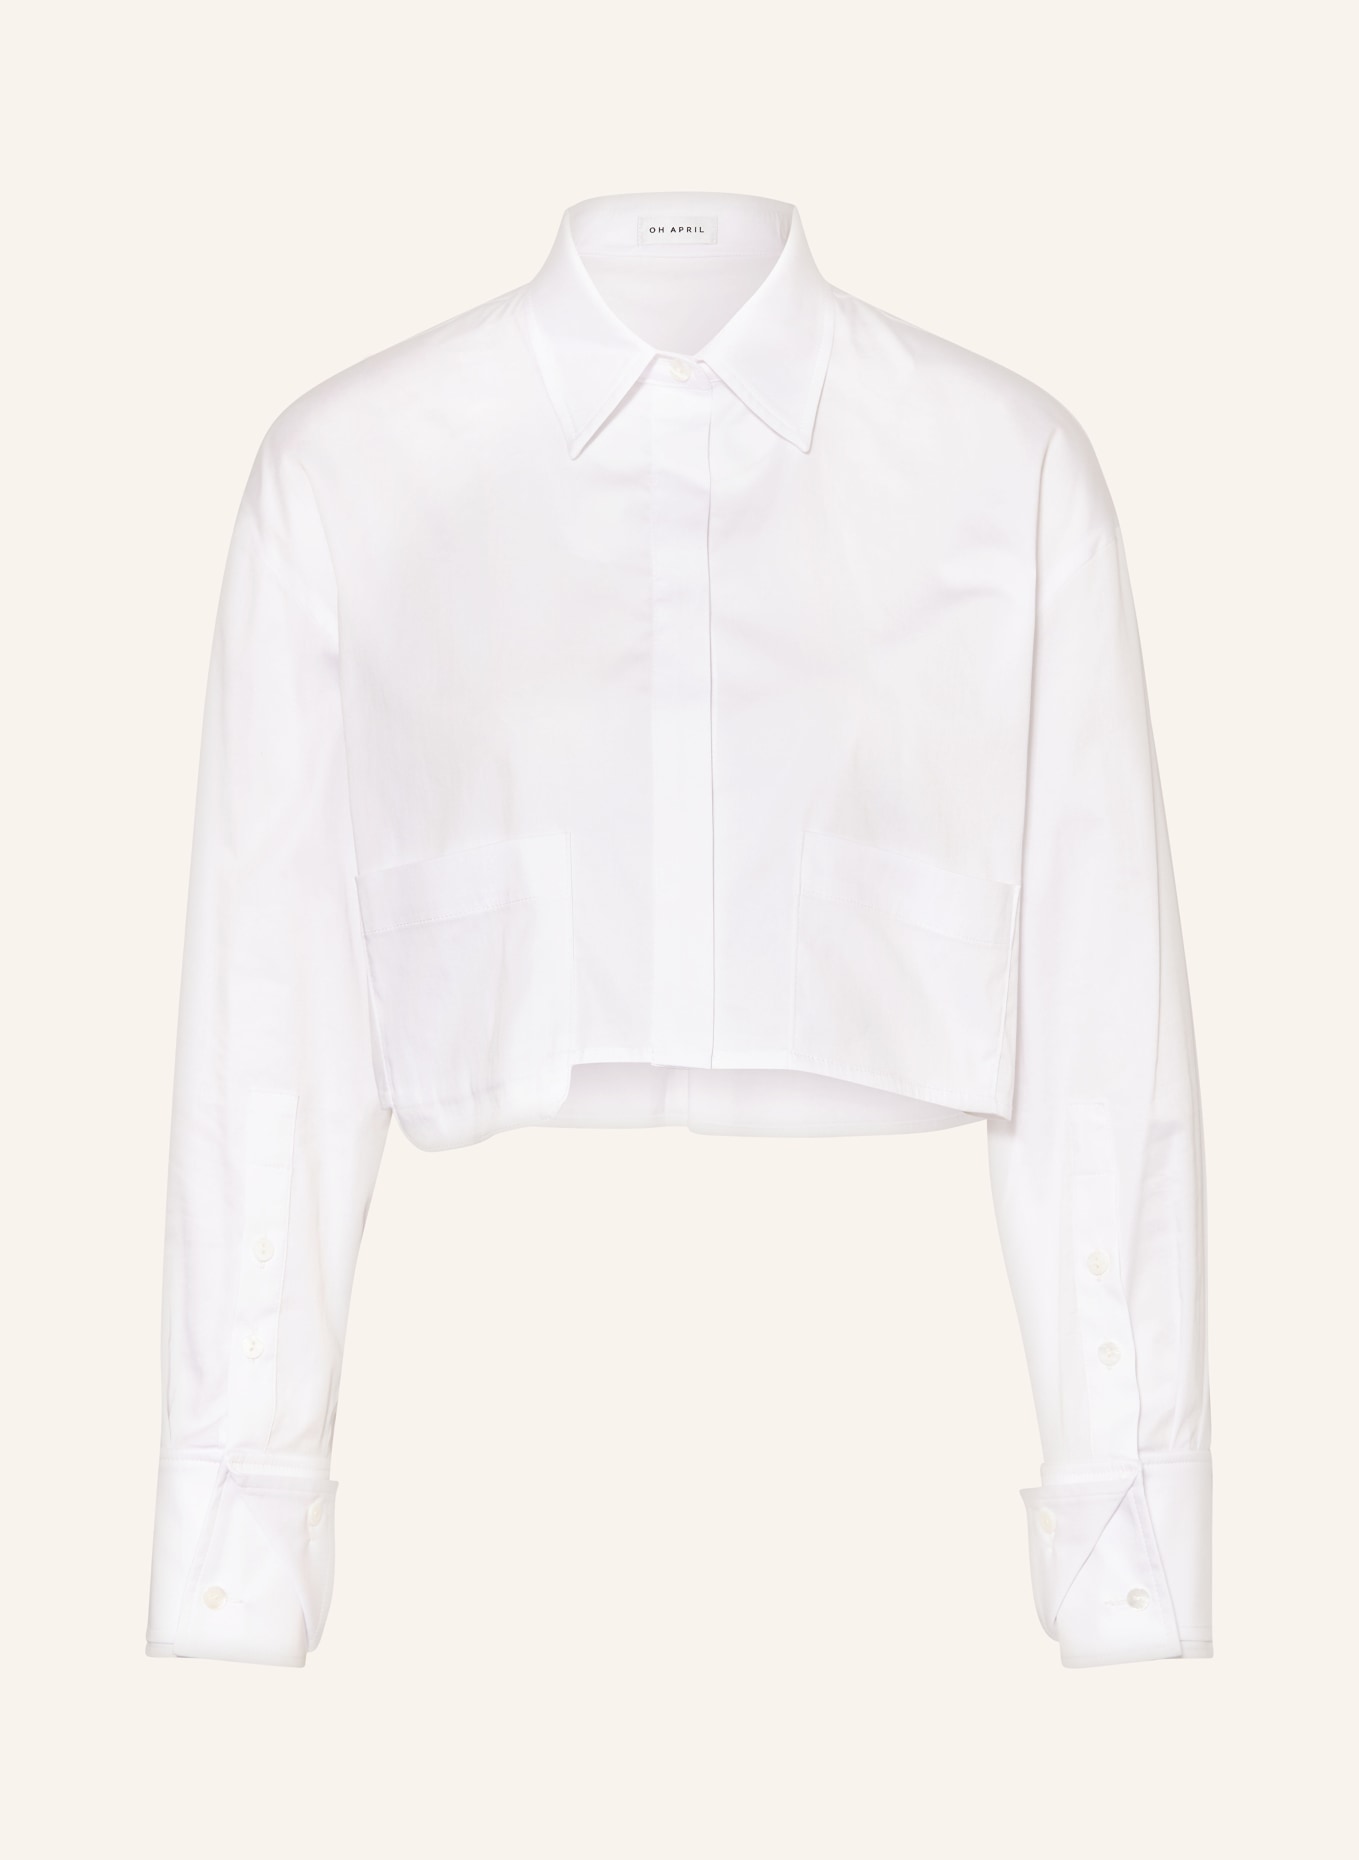 OH APRIL Cropped shirt blouse ARIA, Color: WHITE (Image 1)